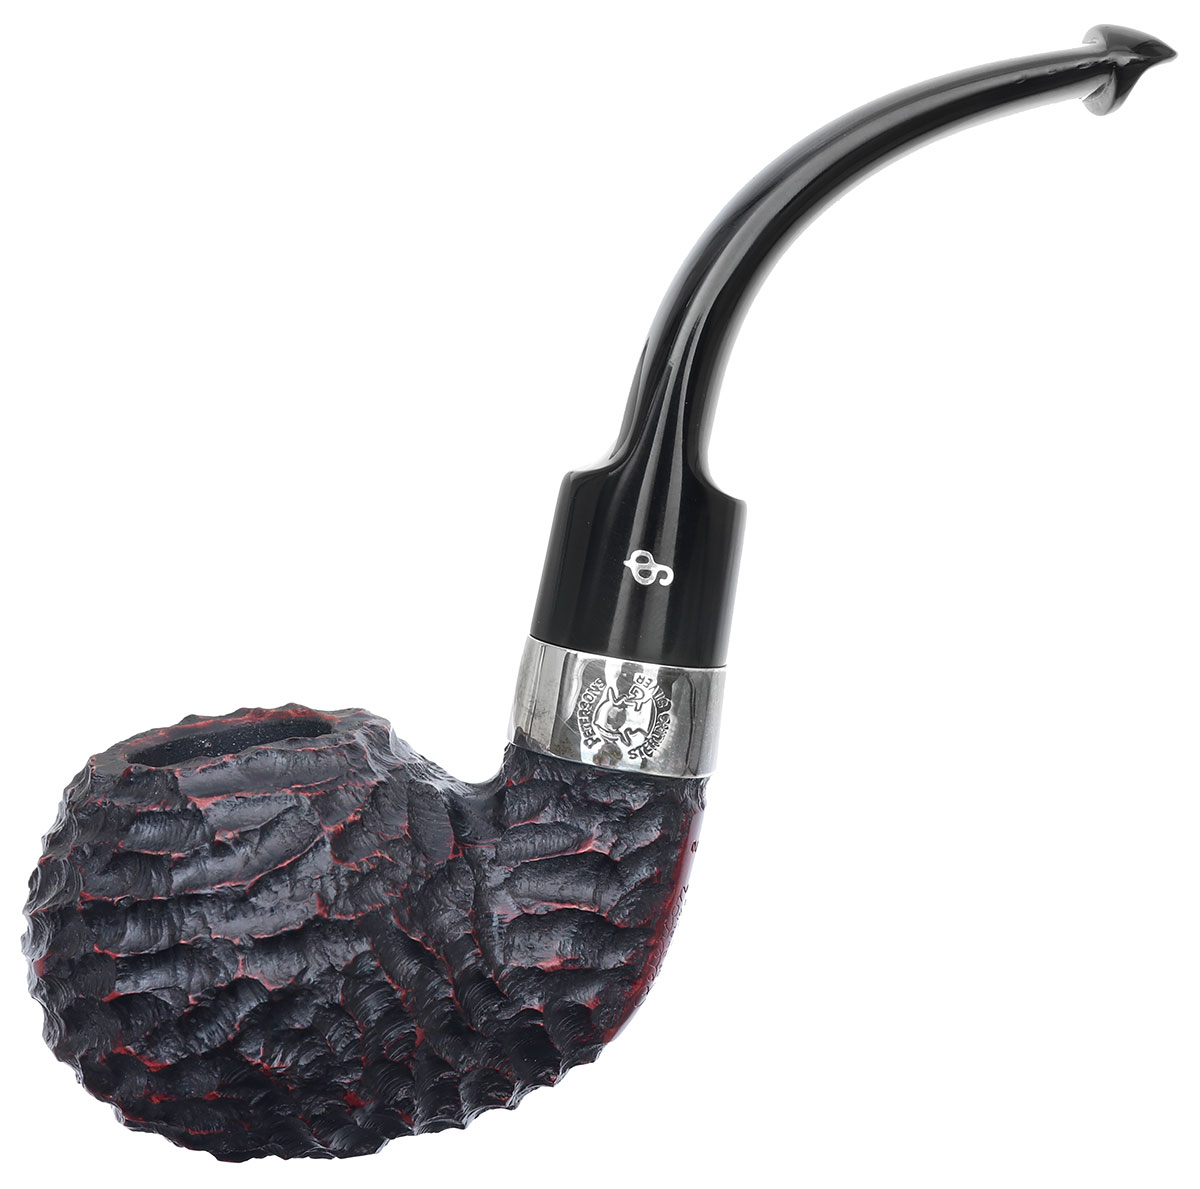 Irish Seconds Rusticated Bent Apple with Silver Band P-Lip (2)